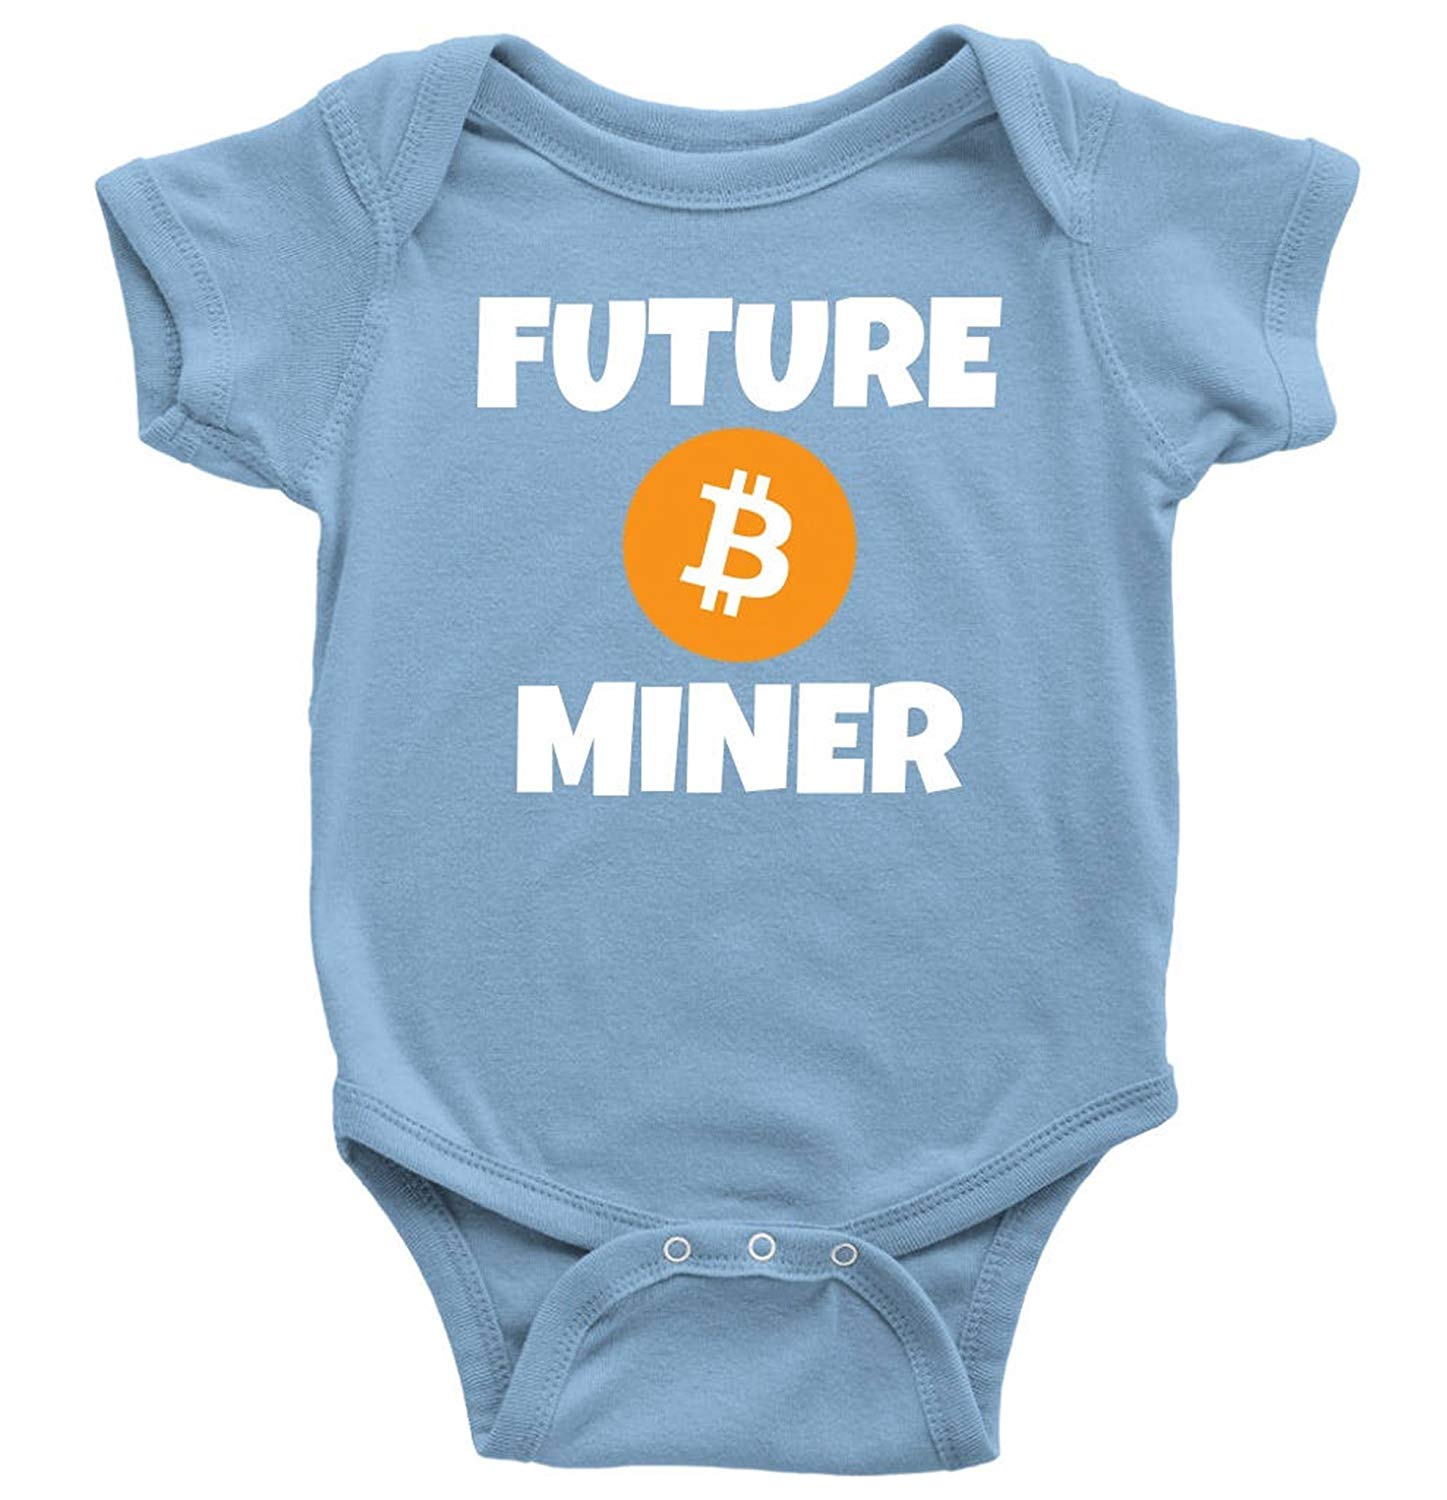 One-Piece Baby Bitcoin Shirt by InkCallies 